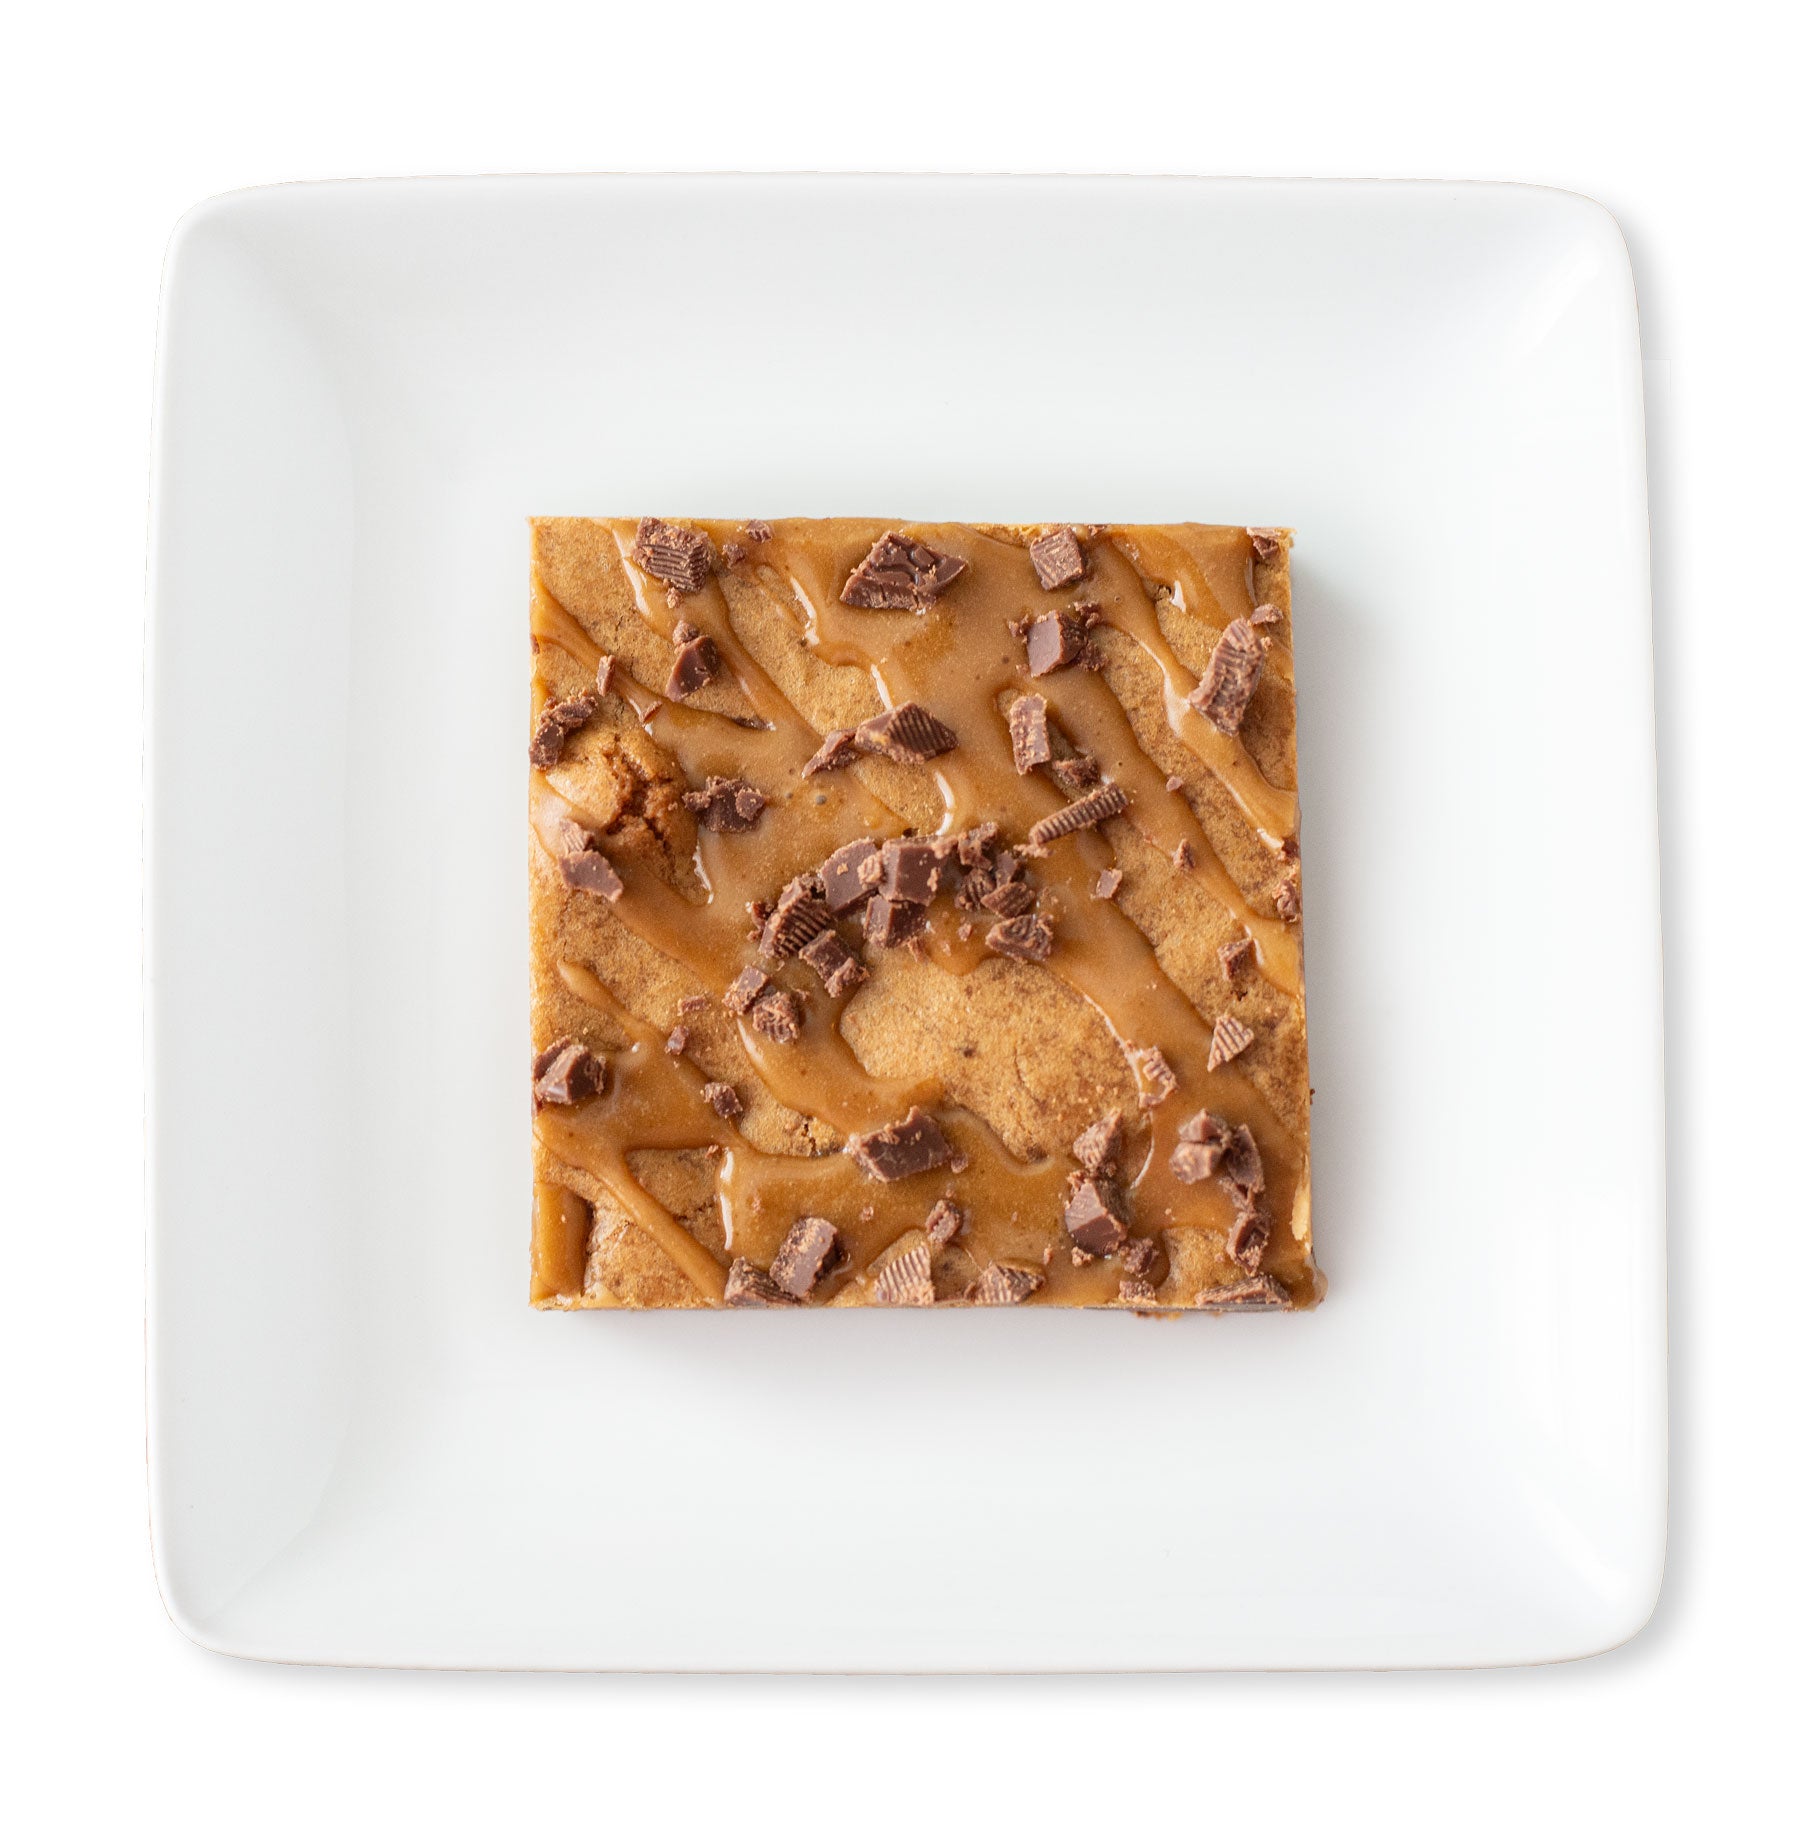 A close-up image of a Milk Chocolate Mocha Blondie, showcasing its dense and chewy texture, topped with a glossy espresso glaze